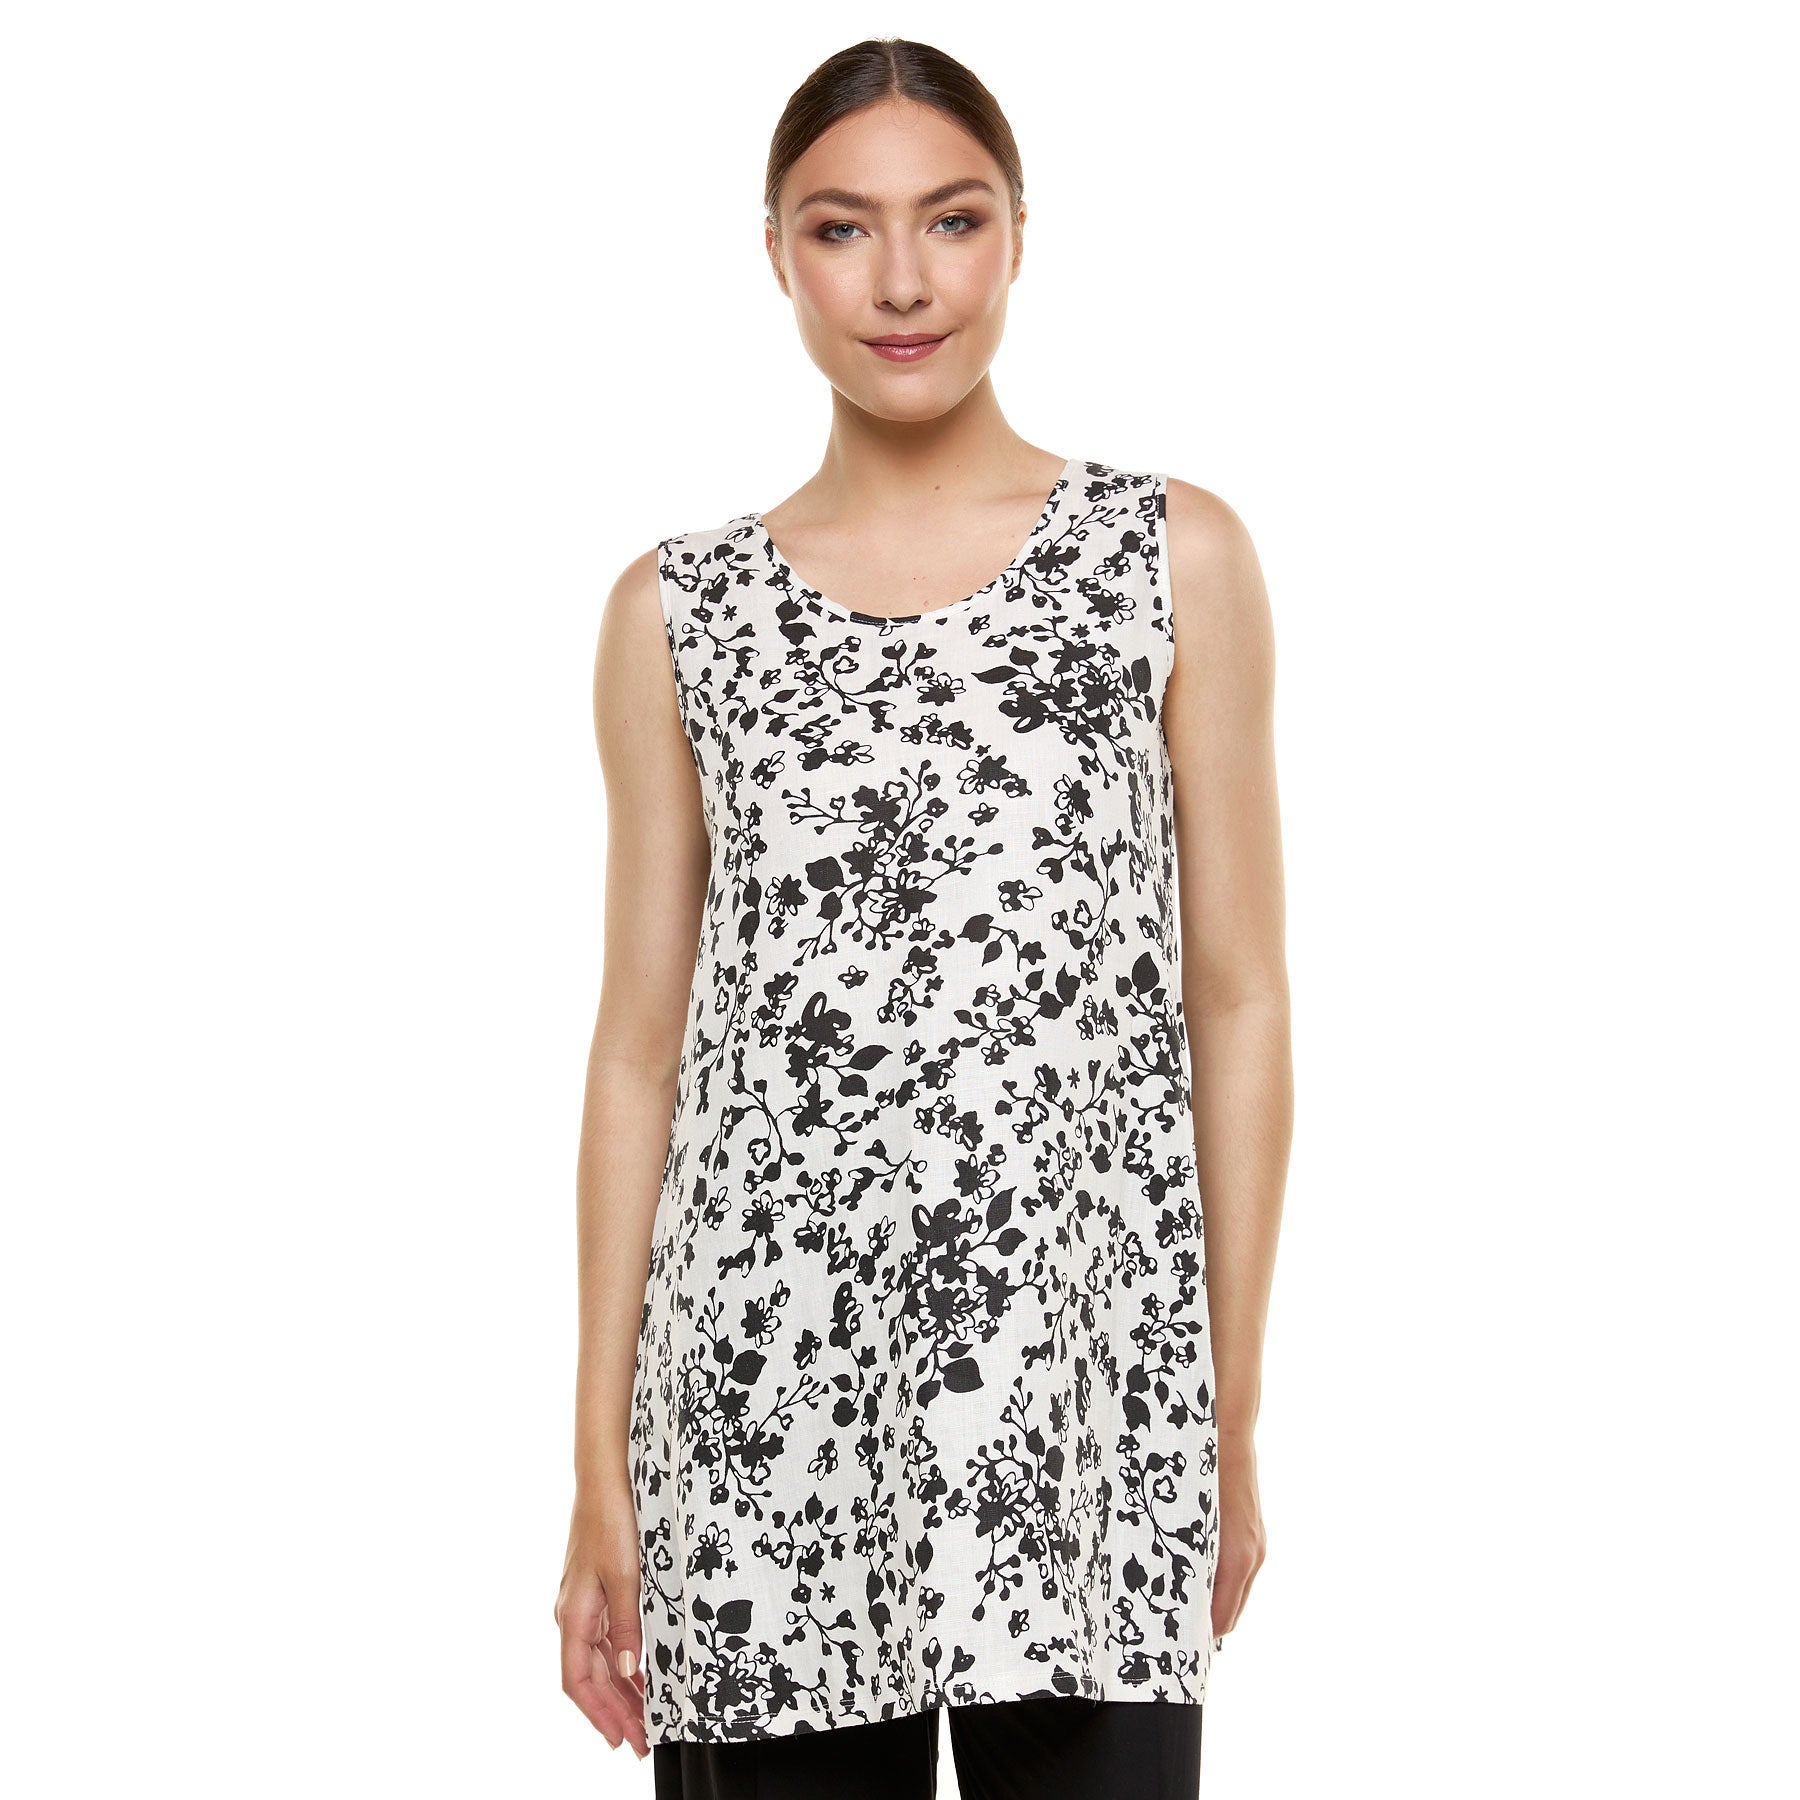 Chic & Simple Elena Sleeveless Blouse - Black and White Floral